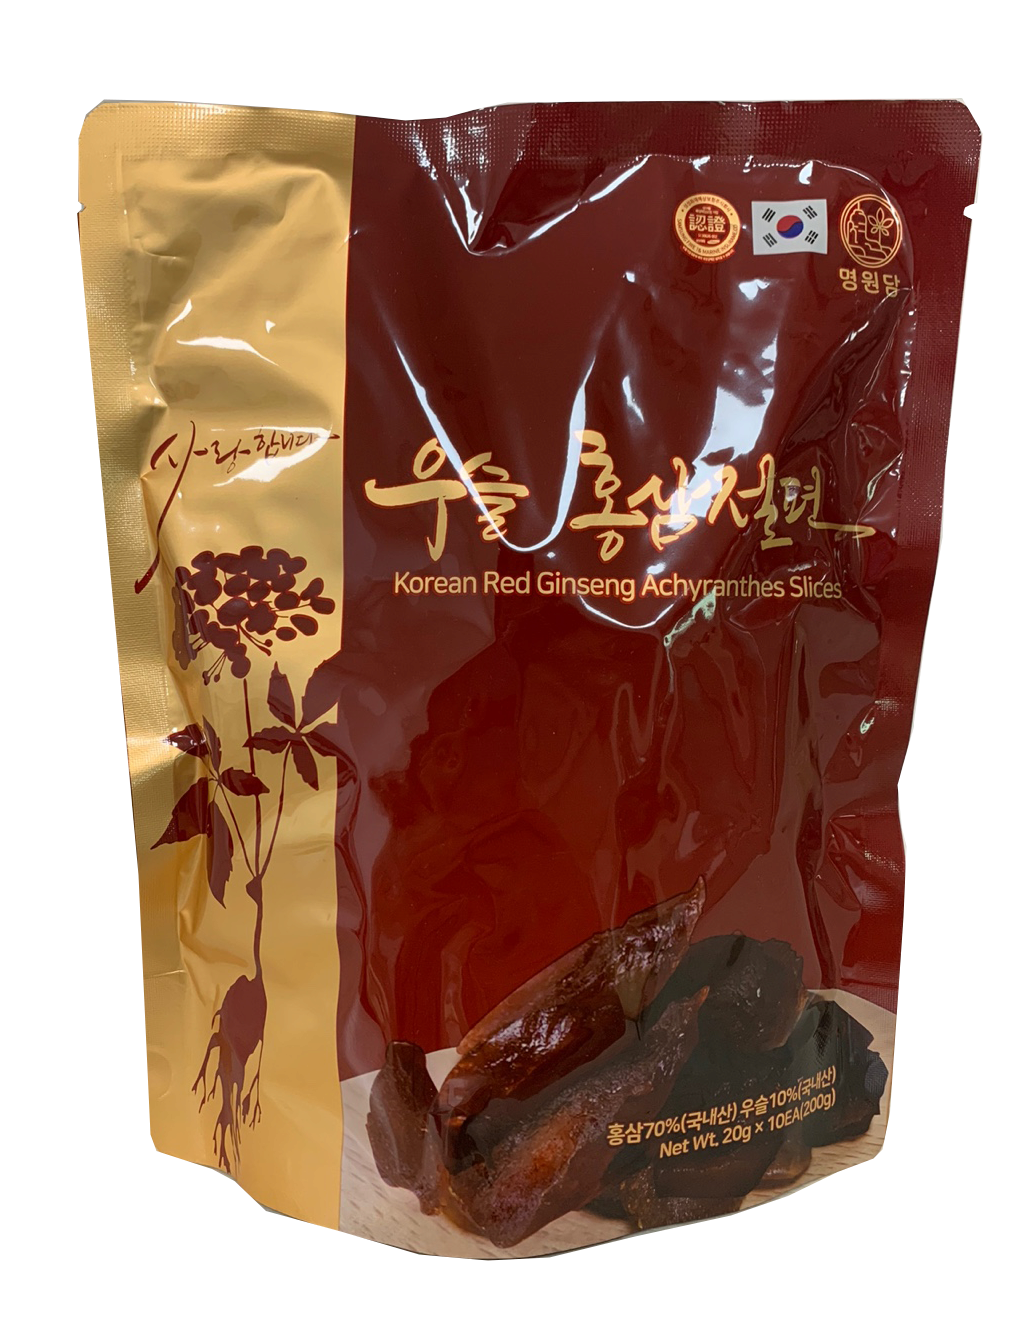 Korean Red Ginseng Achyranthes Slices Pouch